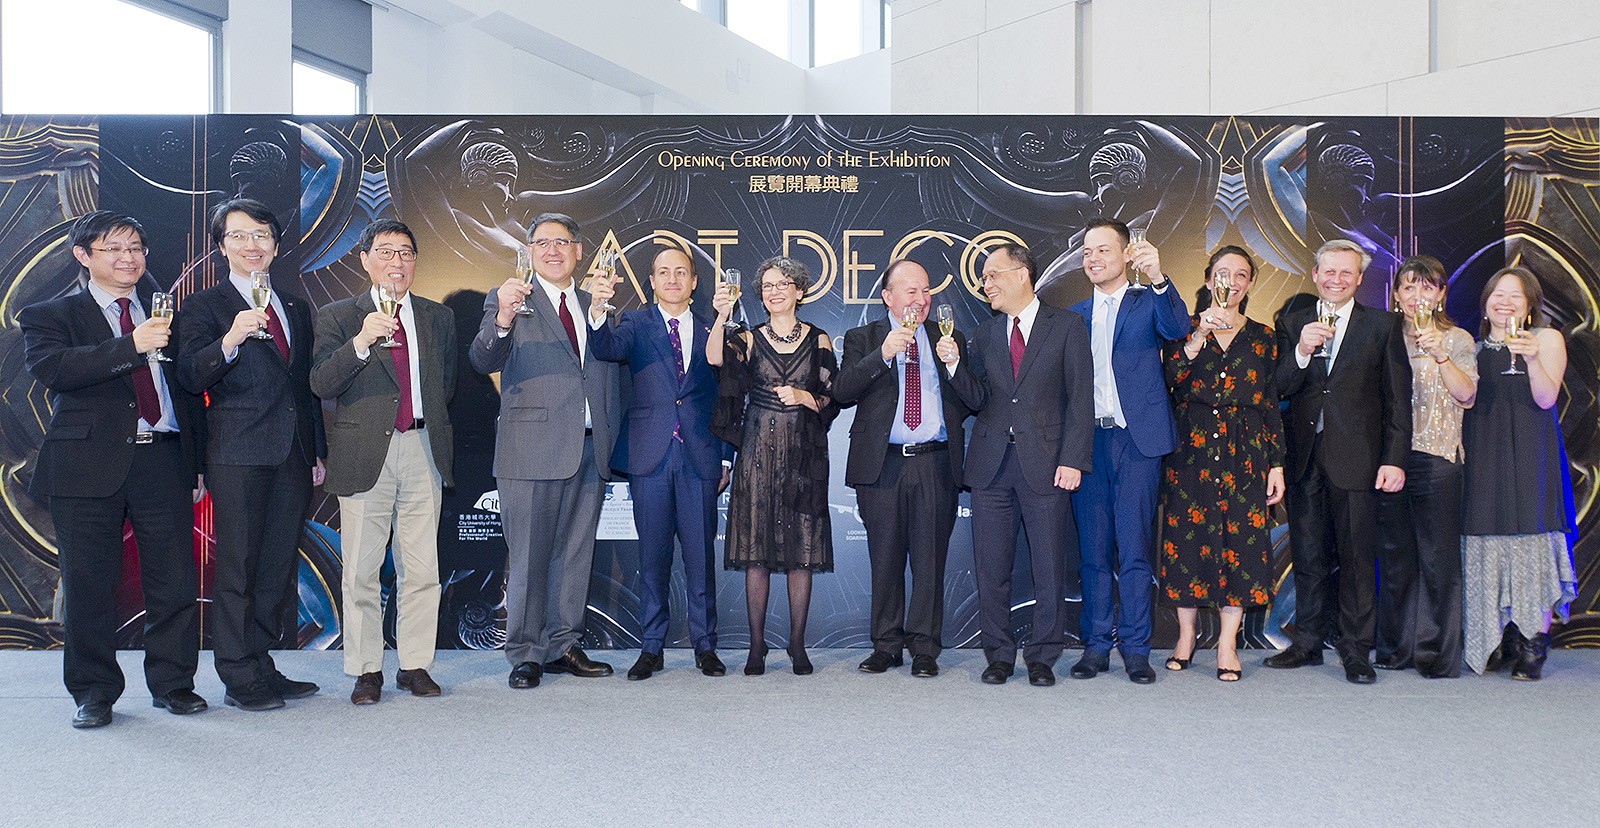 (Starting from third from left) President Kuo, Mr Huang, Mr Giorgini, Dr Frank, Mr Bréon and guests toast at the opening ceremony.